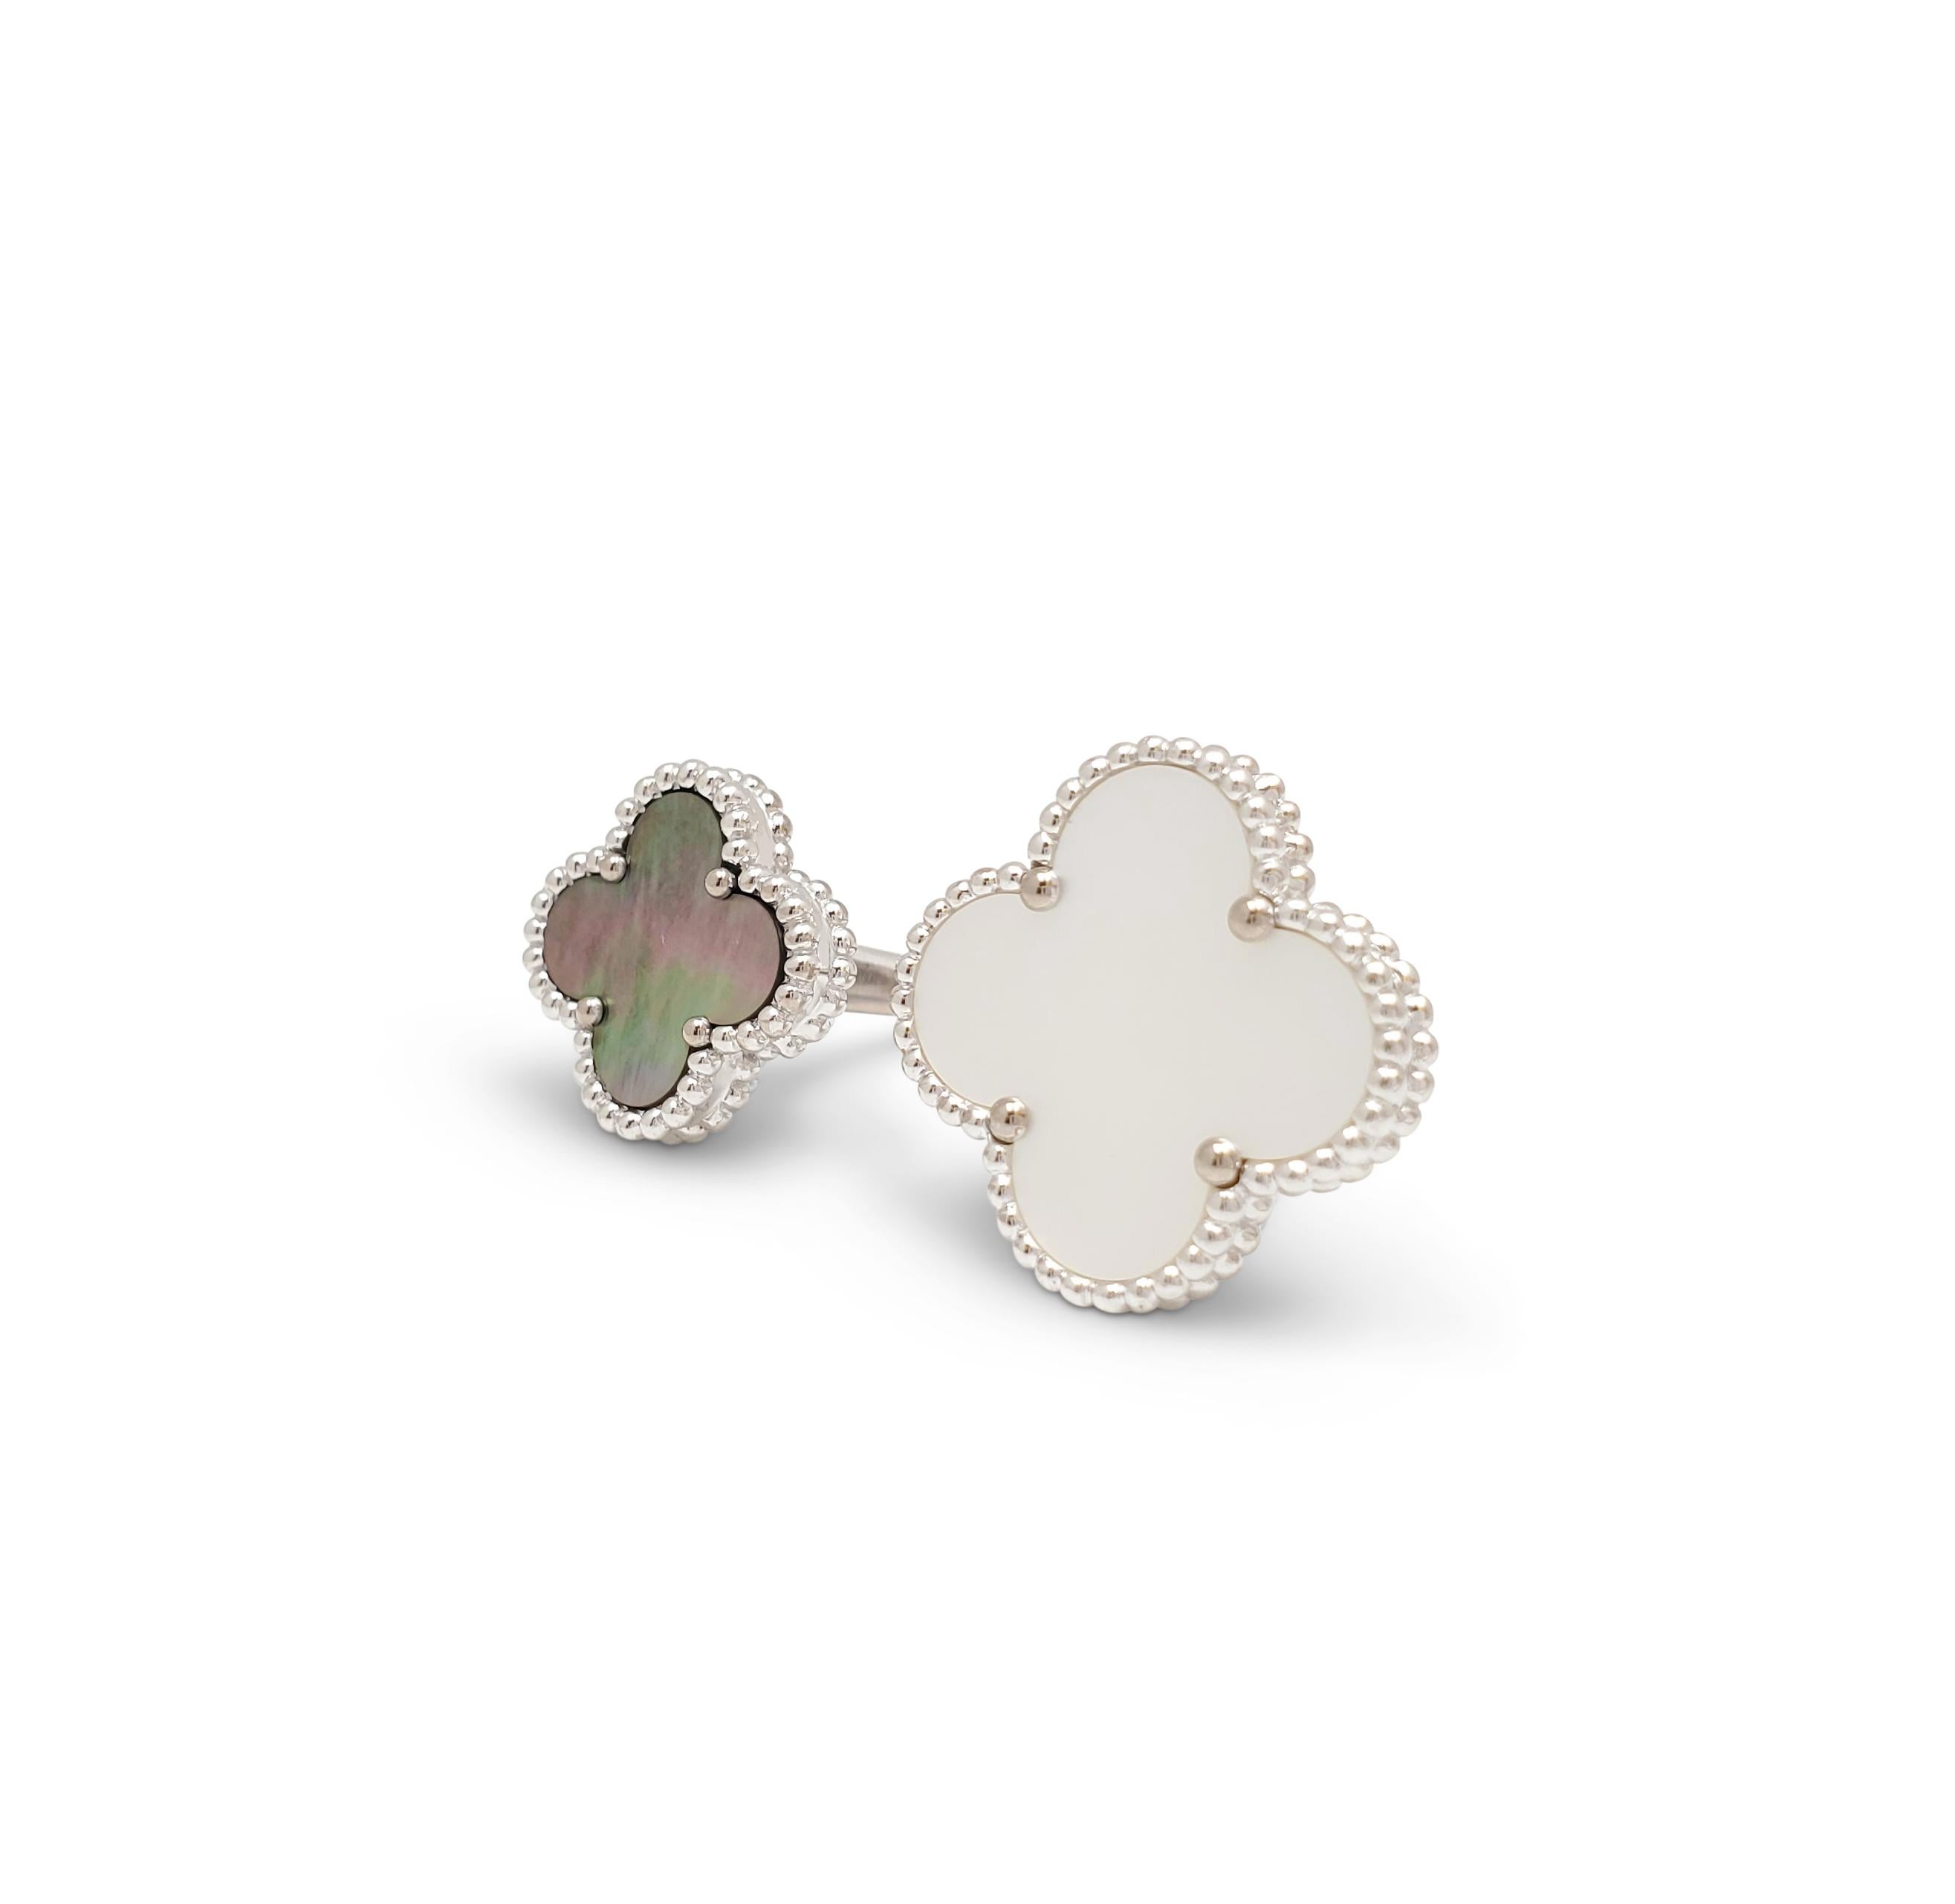 Authentic Van Cleef & Arpels Magic Alhambra between the finger ring crafted in 18 karat white gold and set with two clover-shaped motifs in mother of pearl.  Size 48 (US 4 1/2).  Signed VCA, Au750, with serial number and French hallmarks.  Ring is